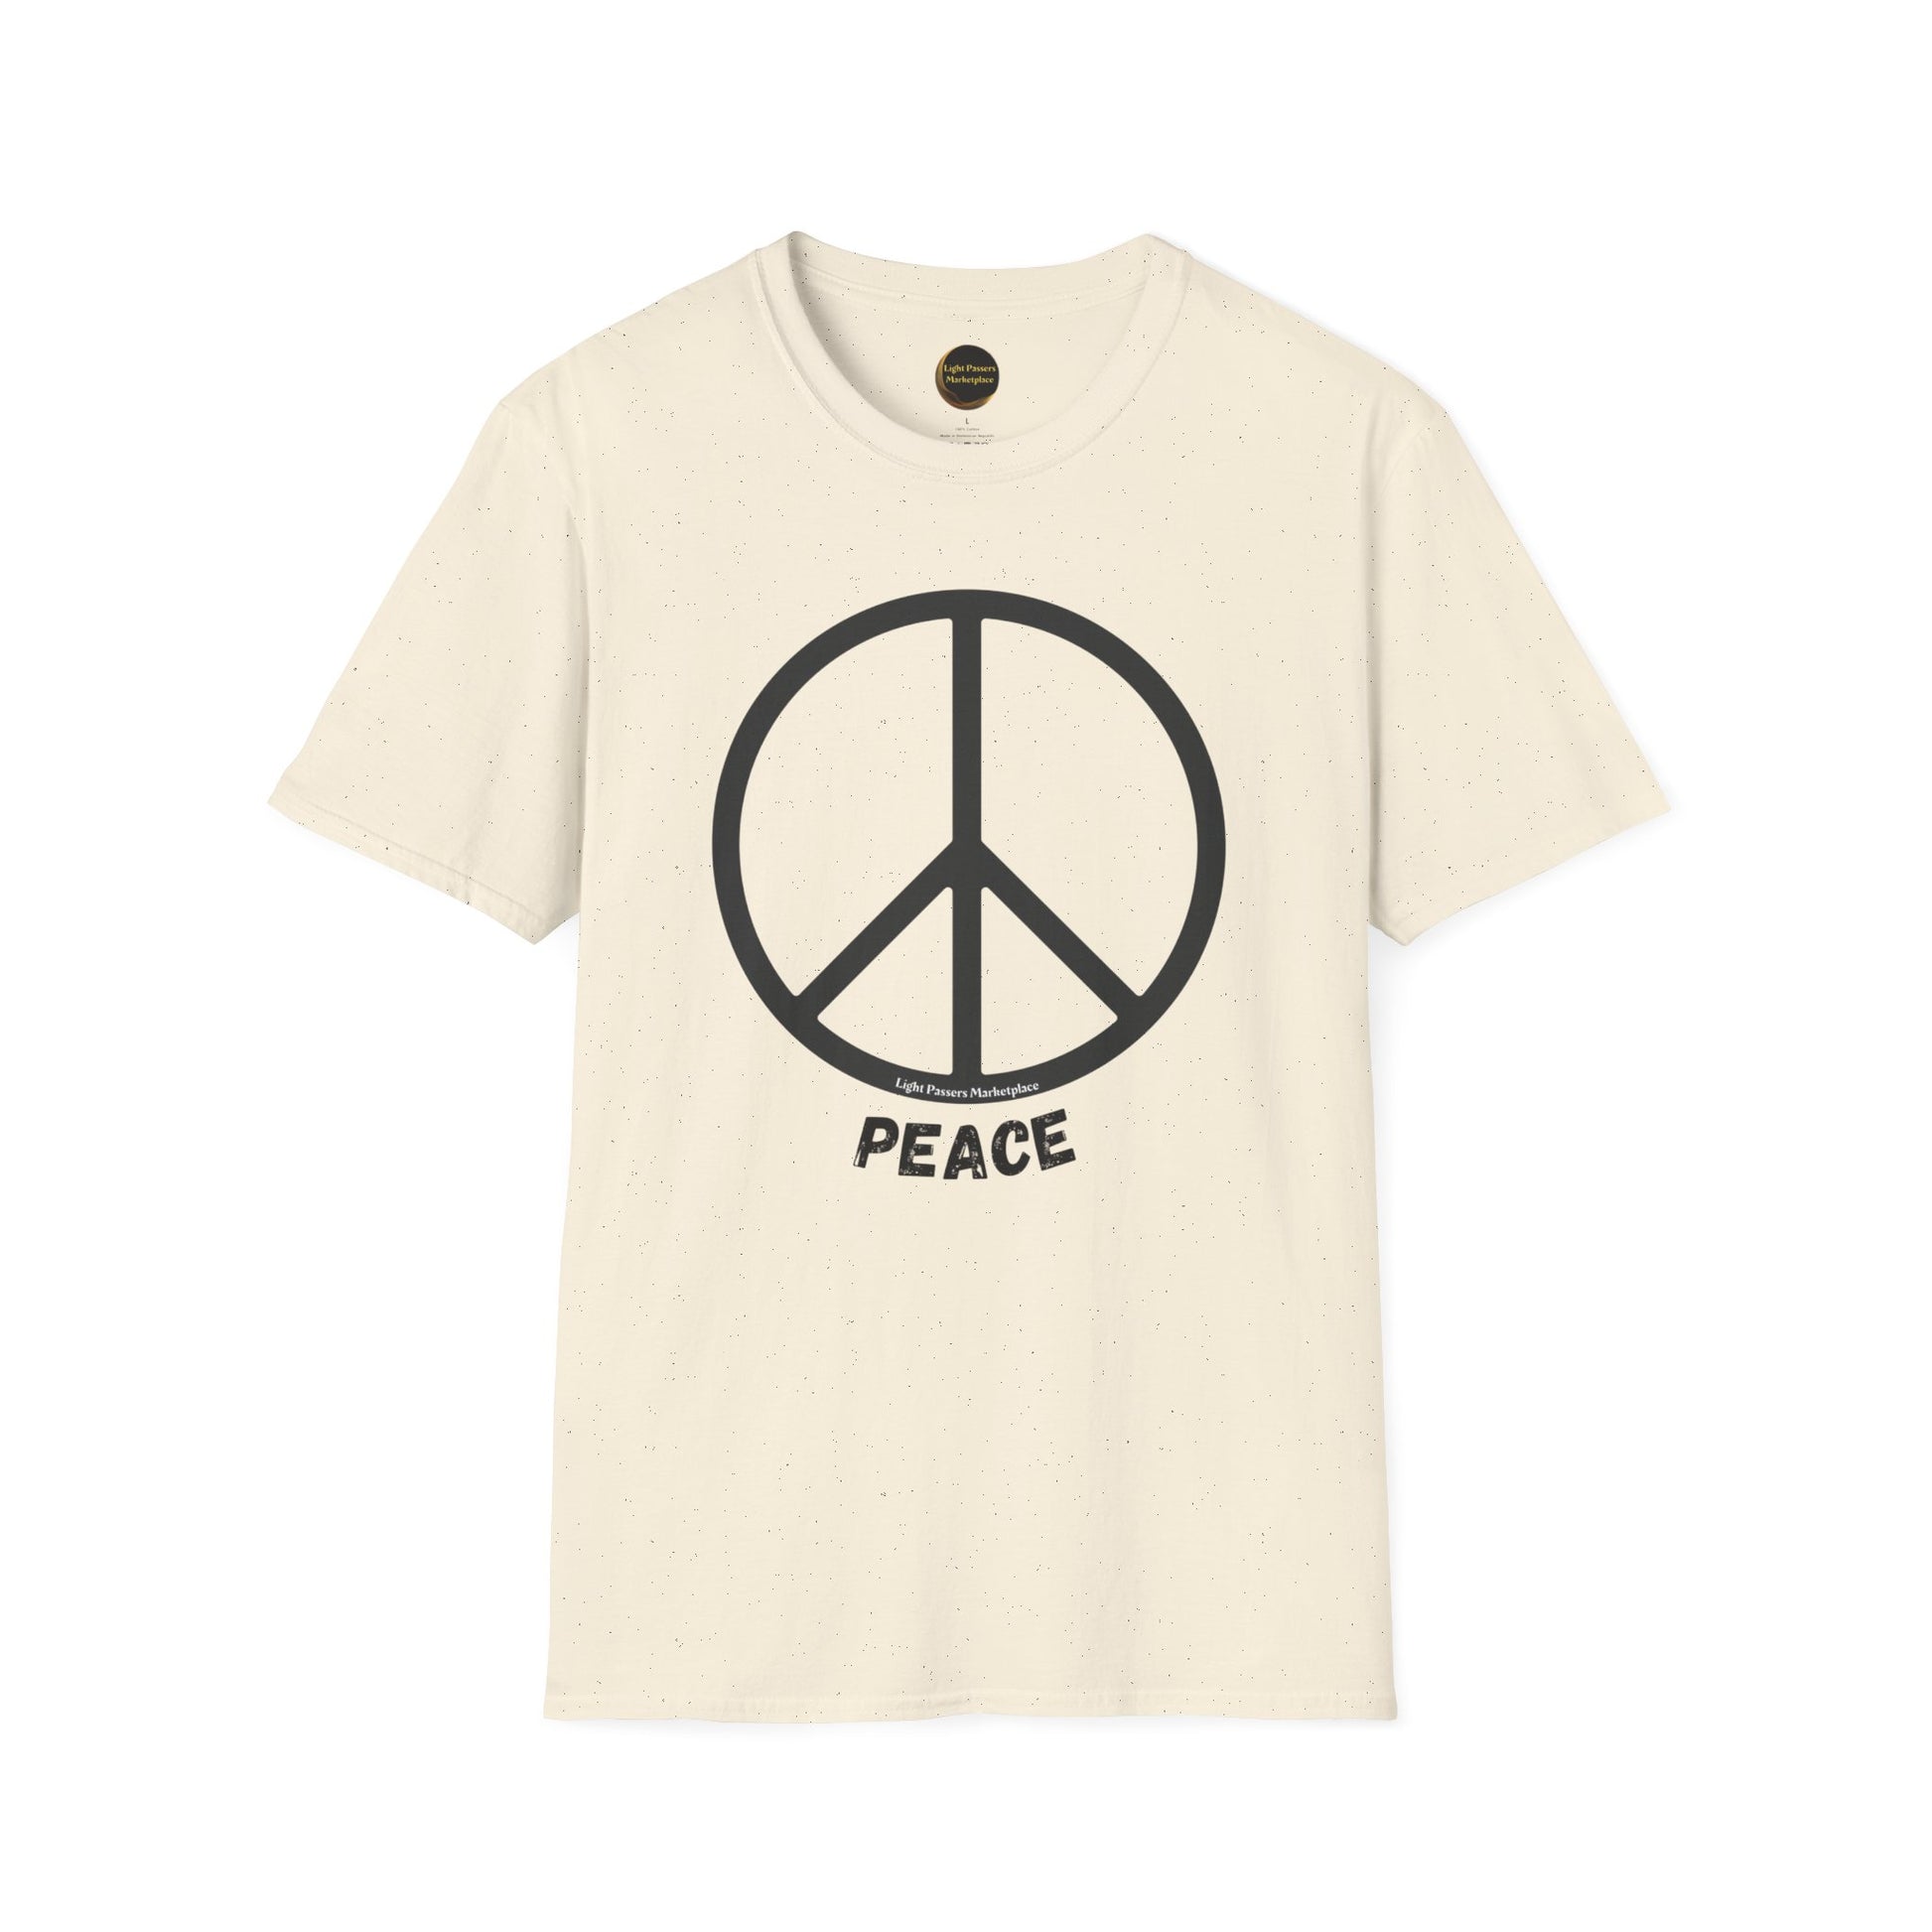 A white unisex t-shirt featuring a peace sign symbol. Made from soft 100% cotton with twill tape shoulders for durability. Classic fit with ribbed crew neckline for versatile style.